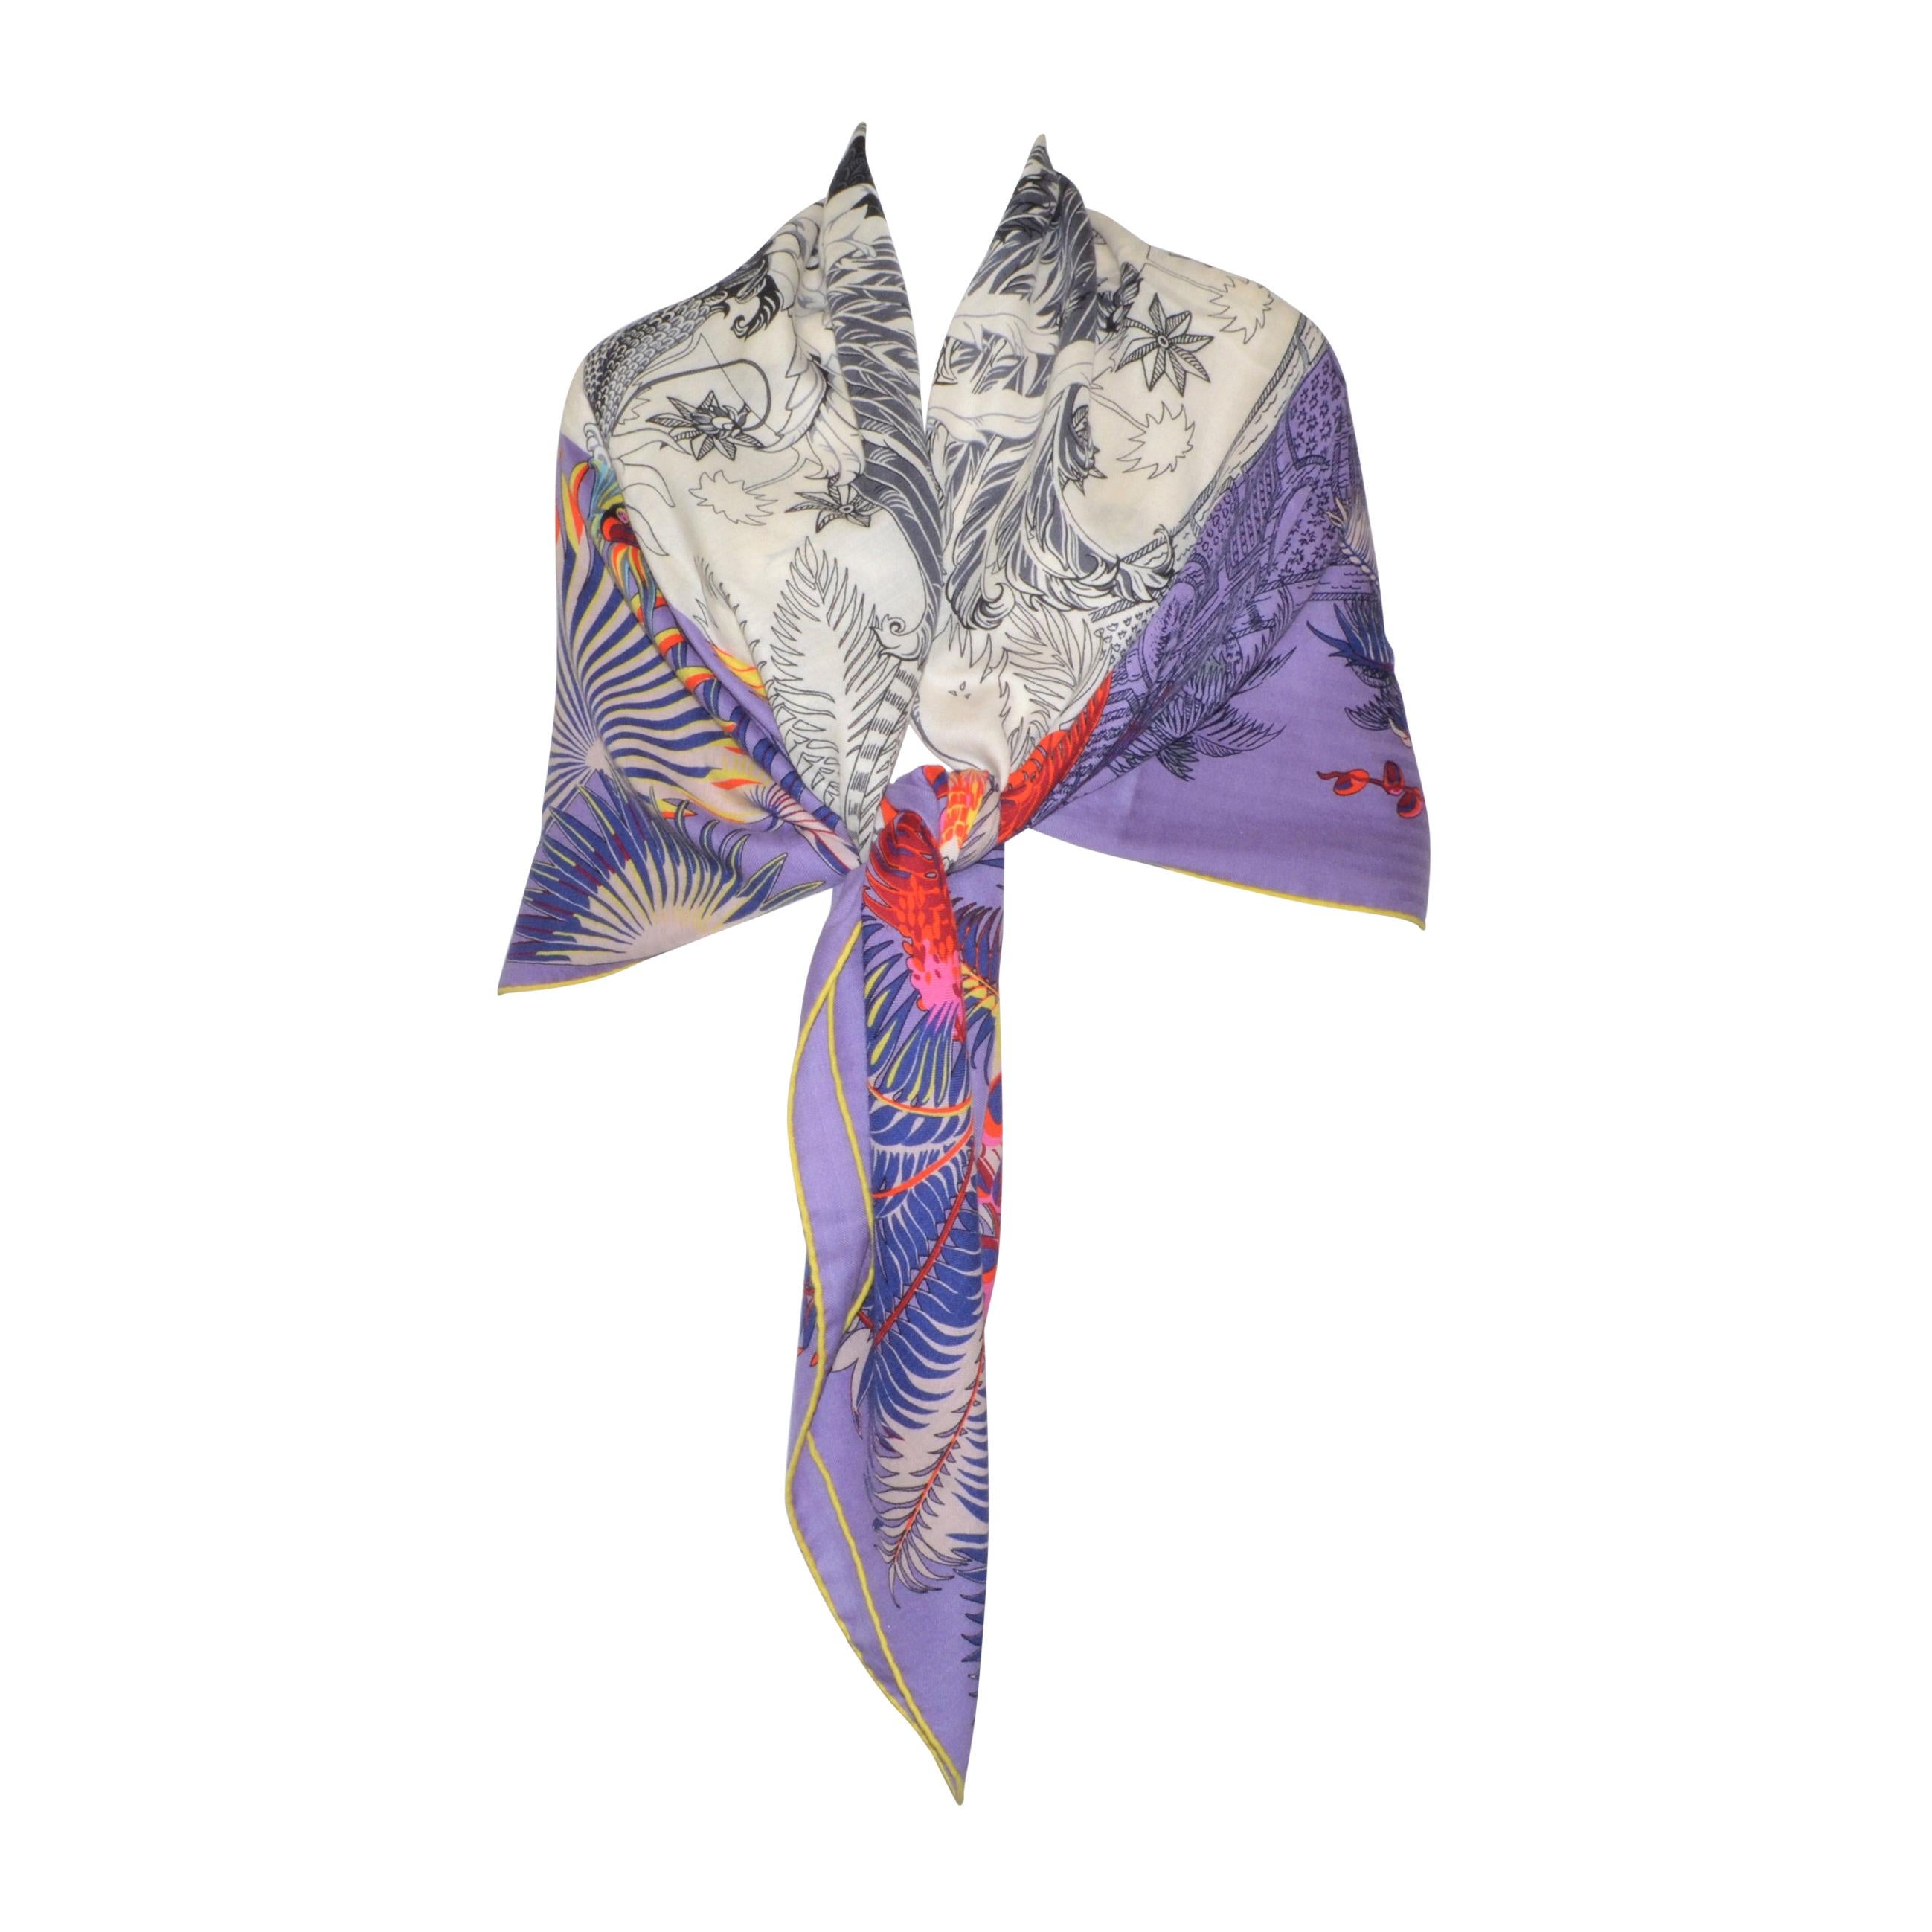 Hermes Lavender Mythiques Phoenix by Laurence Bourthoumien Shawl